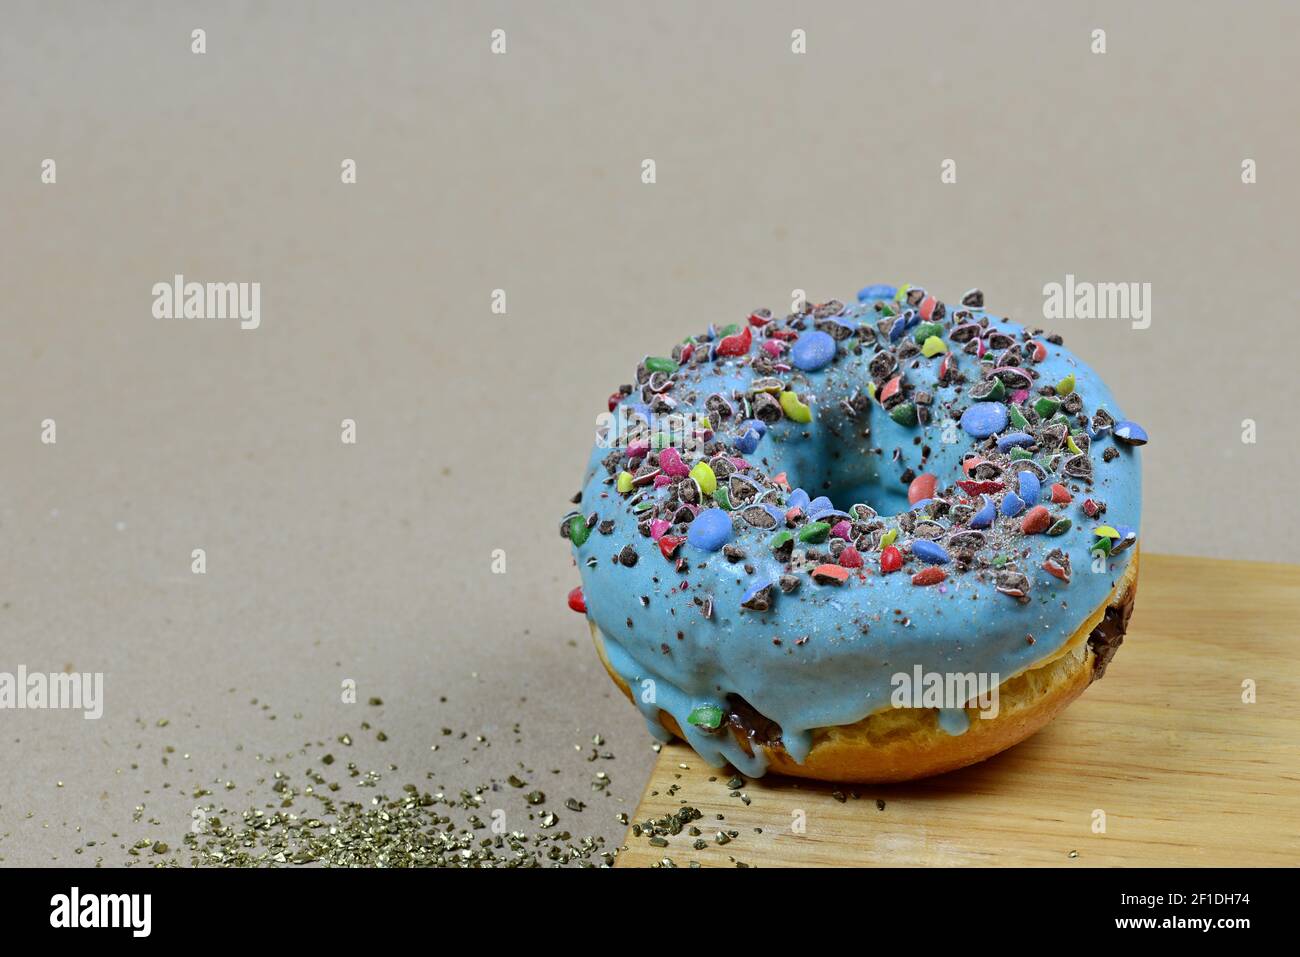 View of a sweet donut with blue icing and crushed candies. Donut on a brown background with a wooden board and sweet stones. Sweet dish. Ready to eat. Stock Photo